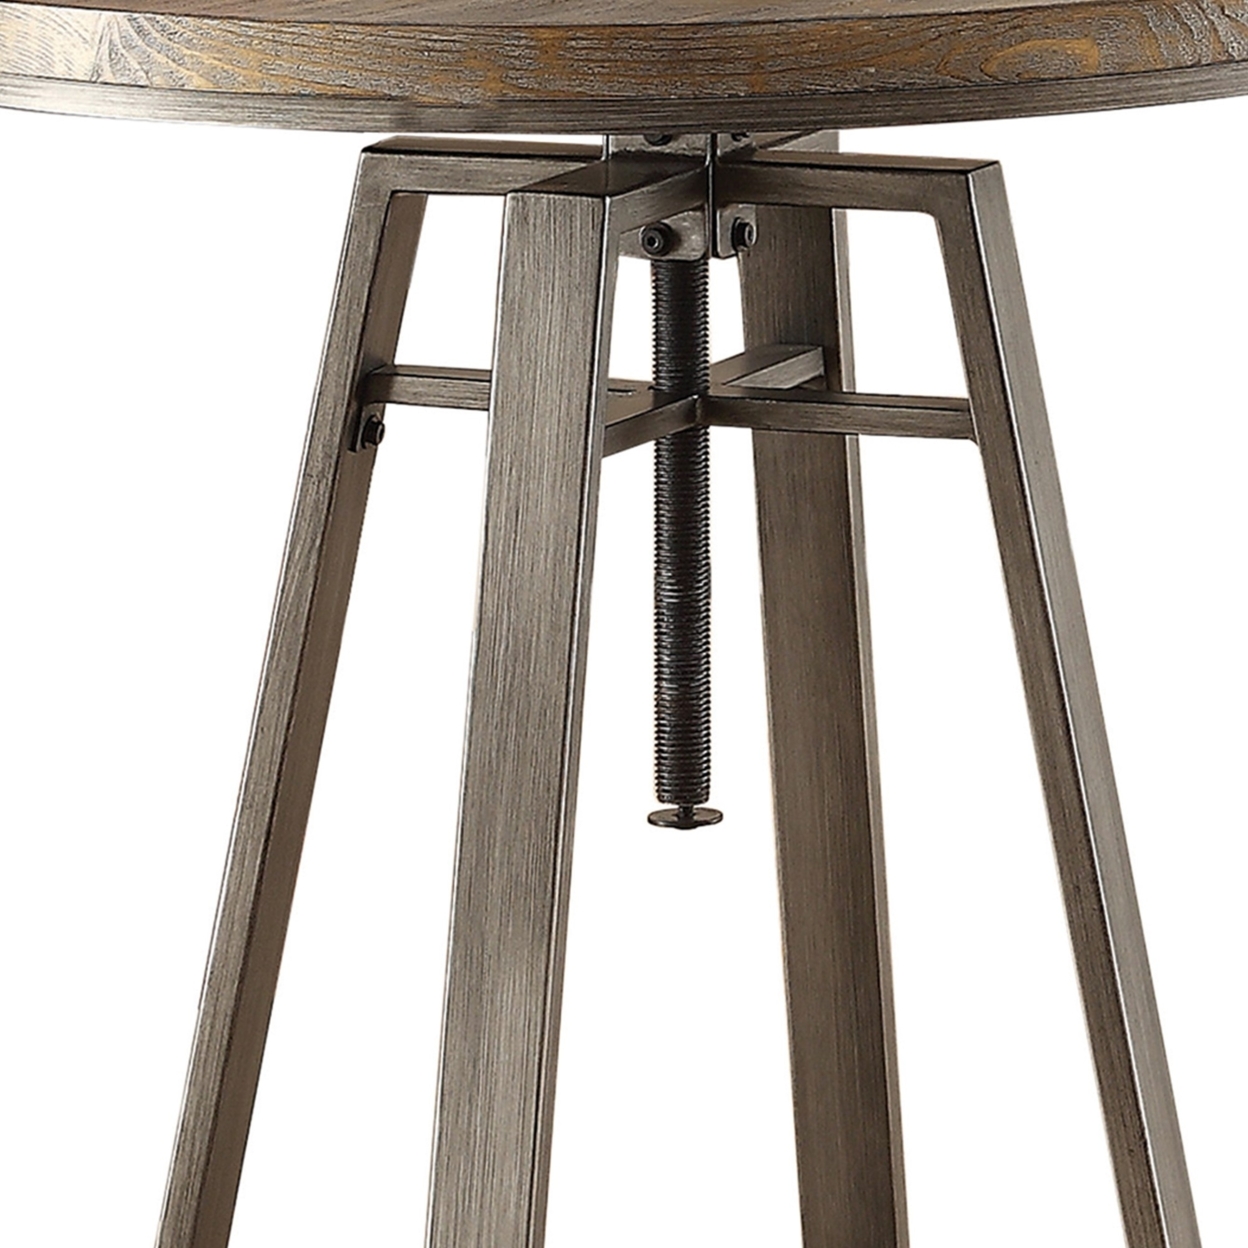 Contemporary Bar Table With Swivel Adjustable Height Mechanism, Brown- Saltoro Sherpi